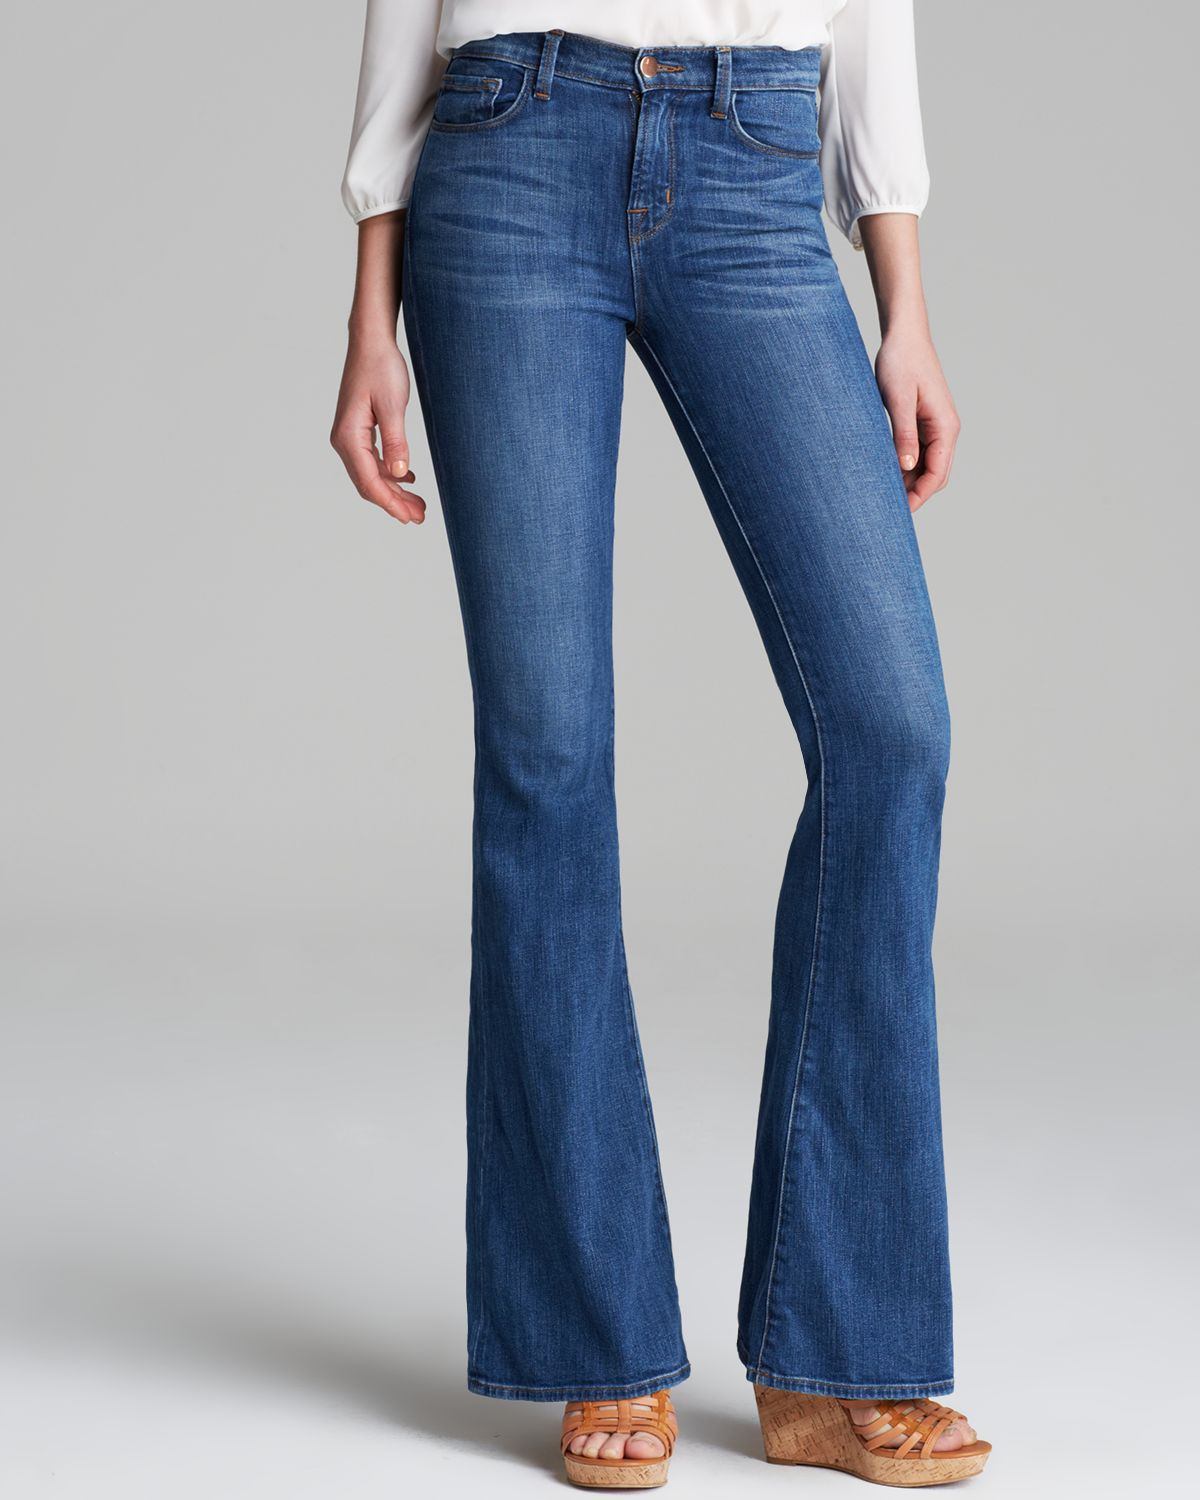 Lyst - J Brand Betty Mid-rise Bootcut Jeans in Blue